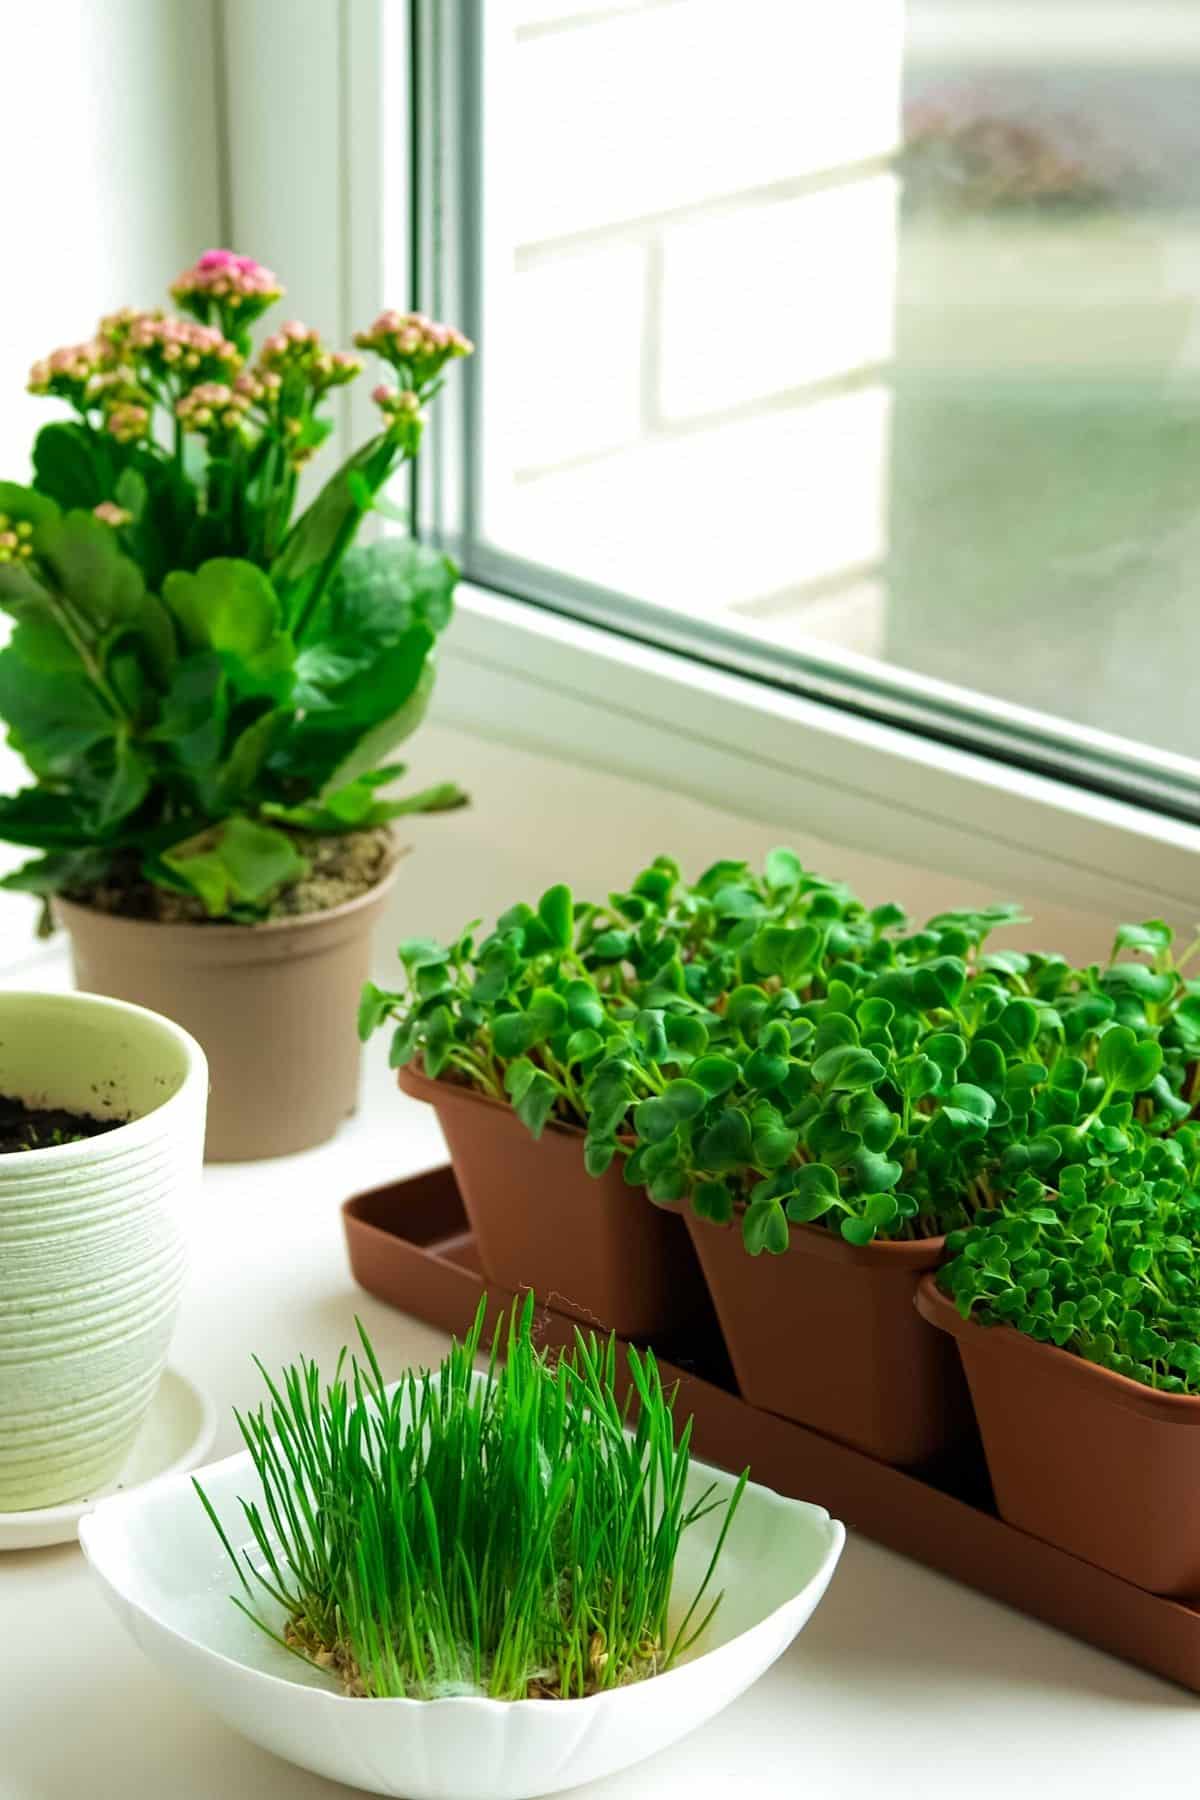 Microgreens in pots with a small amount in a bowl.